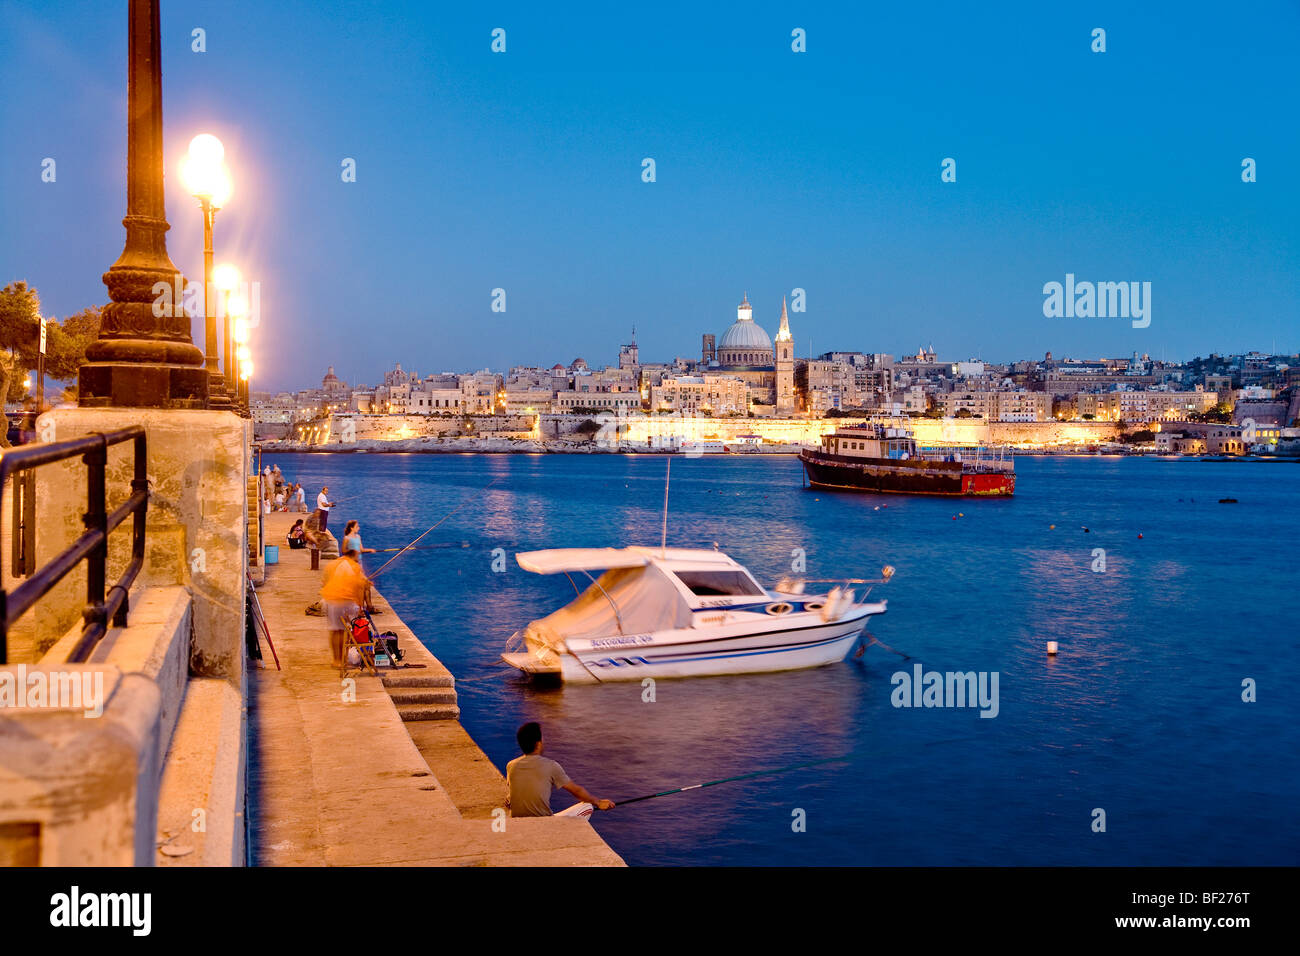 Anglers sitting on the promenade in the evening, view at the town of Valletta, Sliema, Malta, Europe Stock Photo